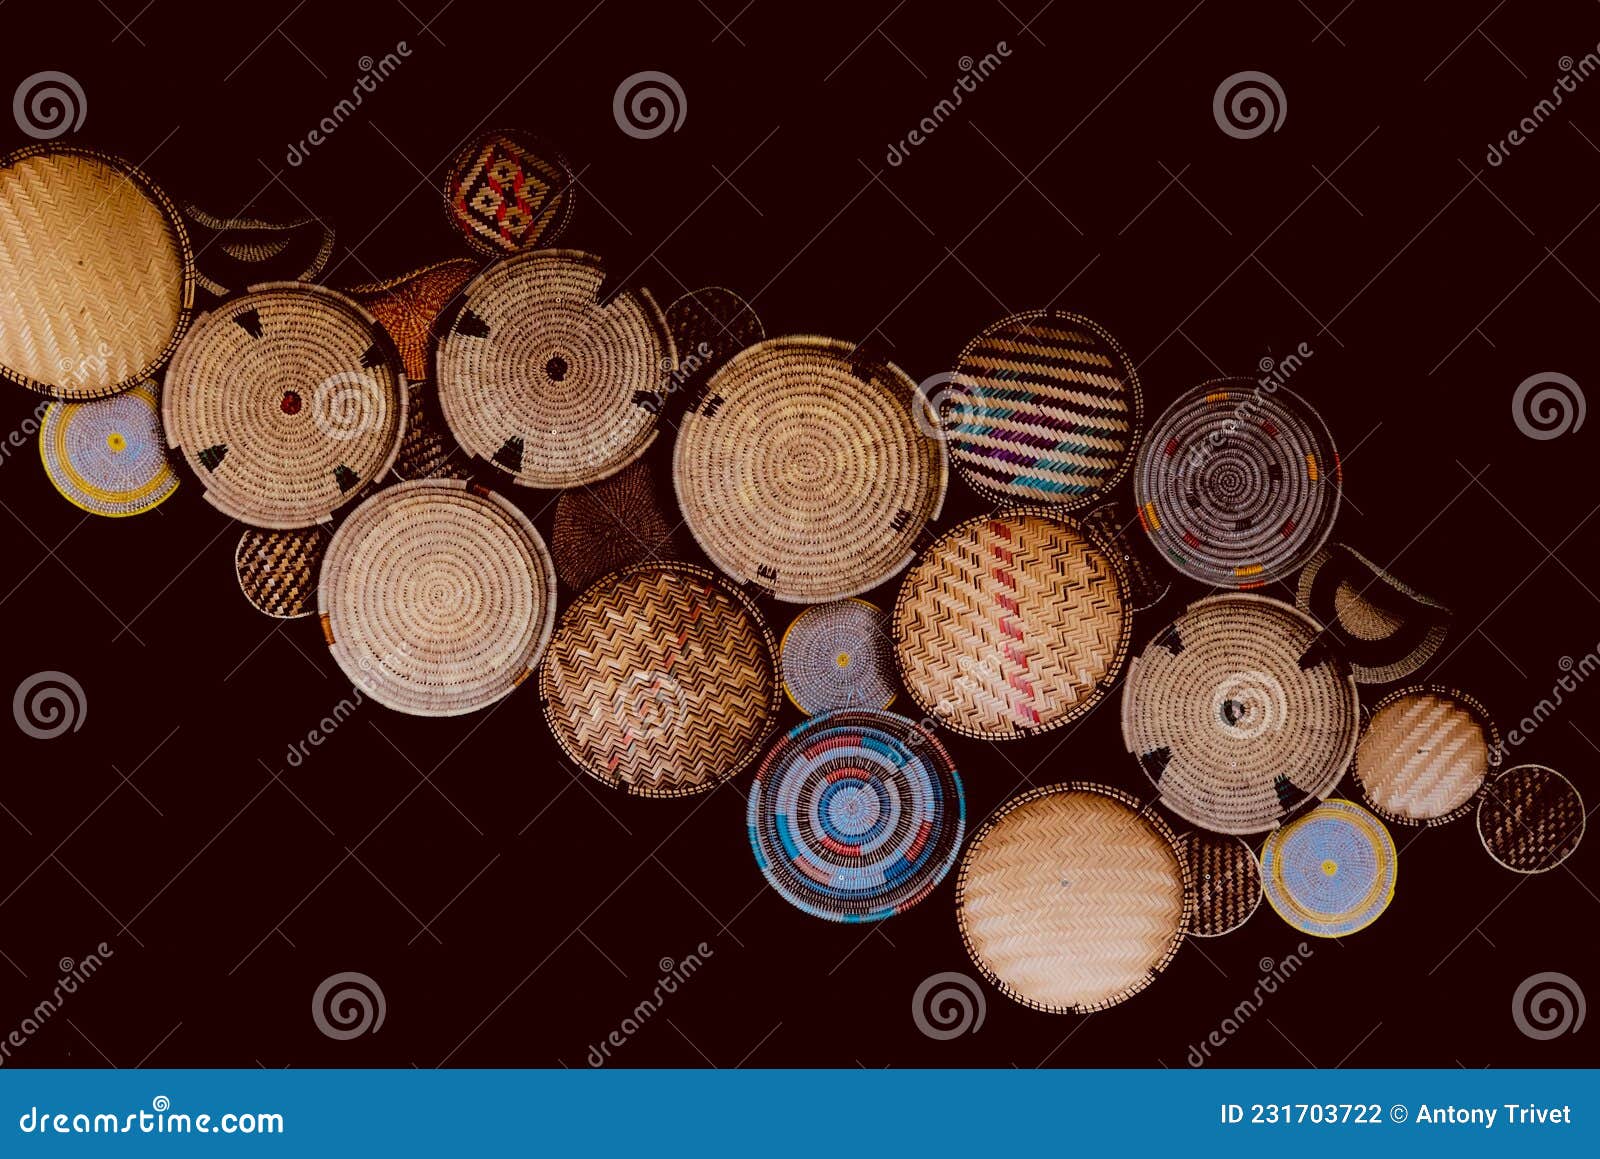 uteo winnower plaited basket tray abstract detailed textured pattern in nairobi city county kenya east african